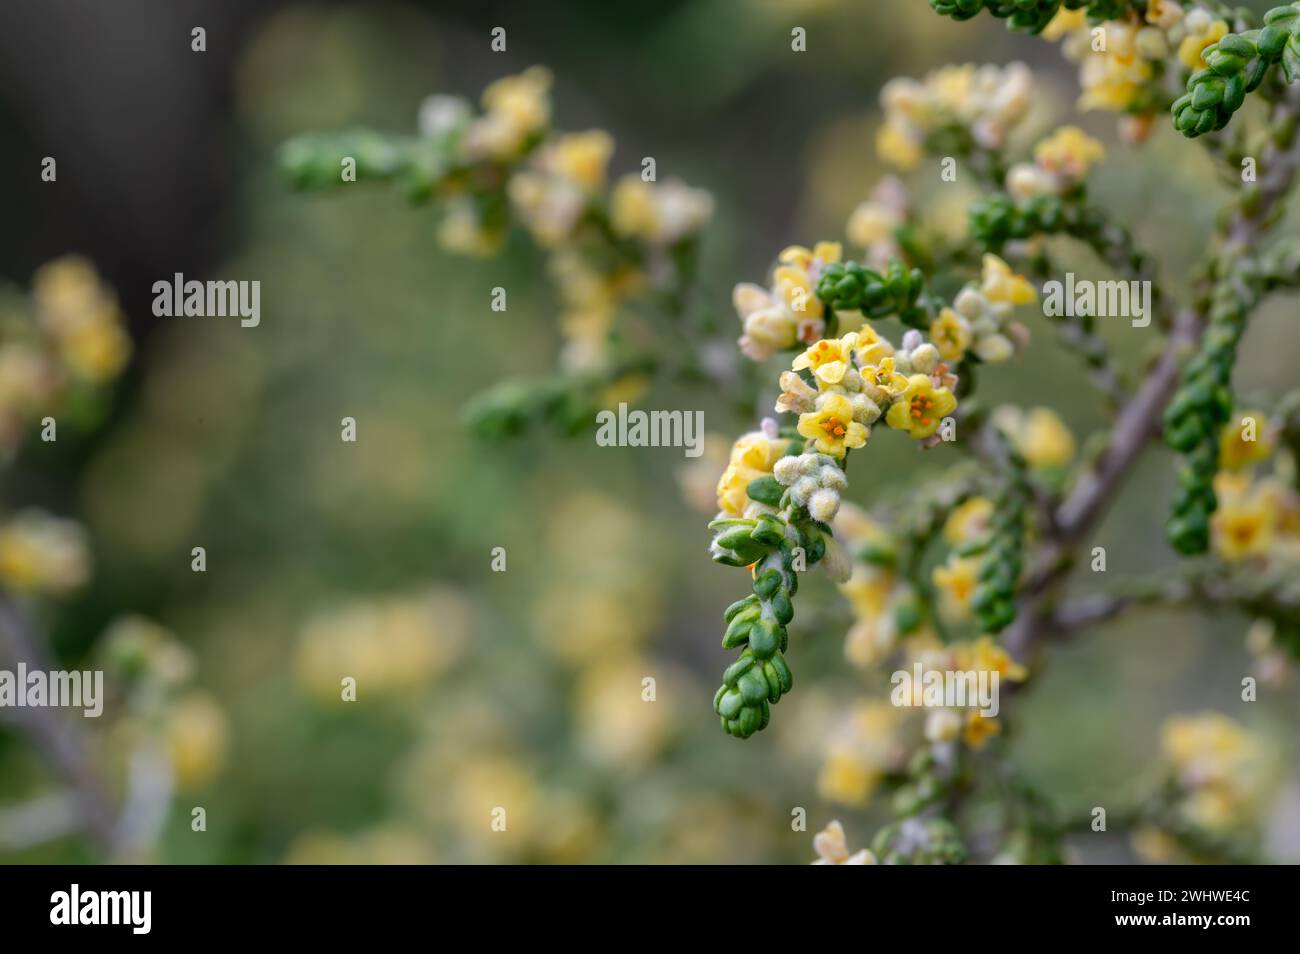 Detail of small yellow flowers of shaggy sparrow-wort (Thymelaea hirsuta) in the field Stock Photo